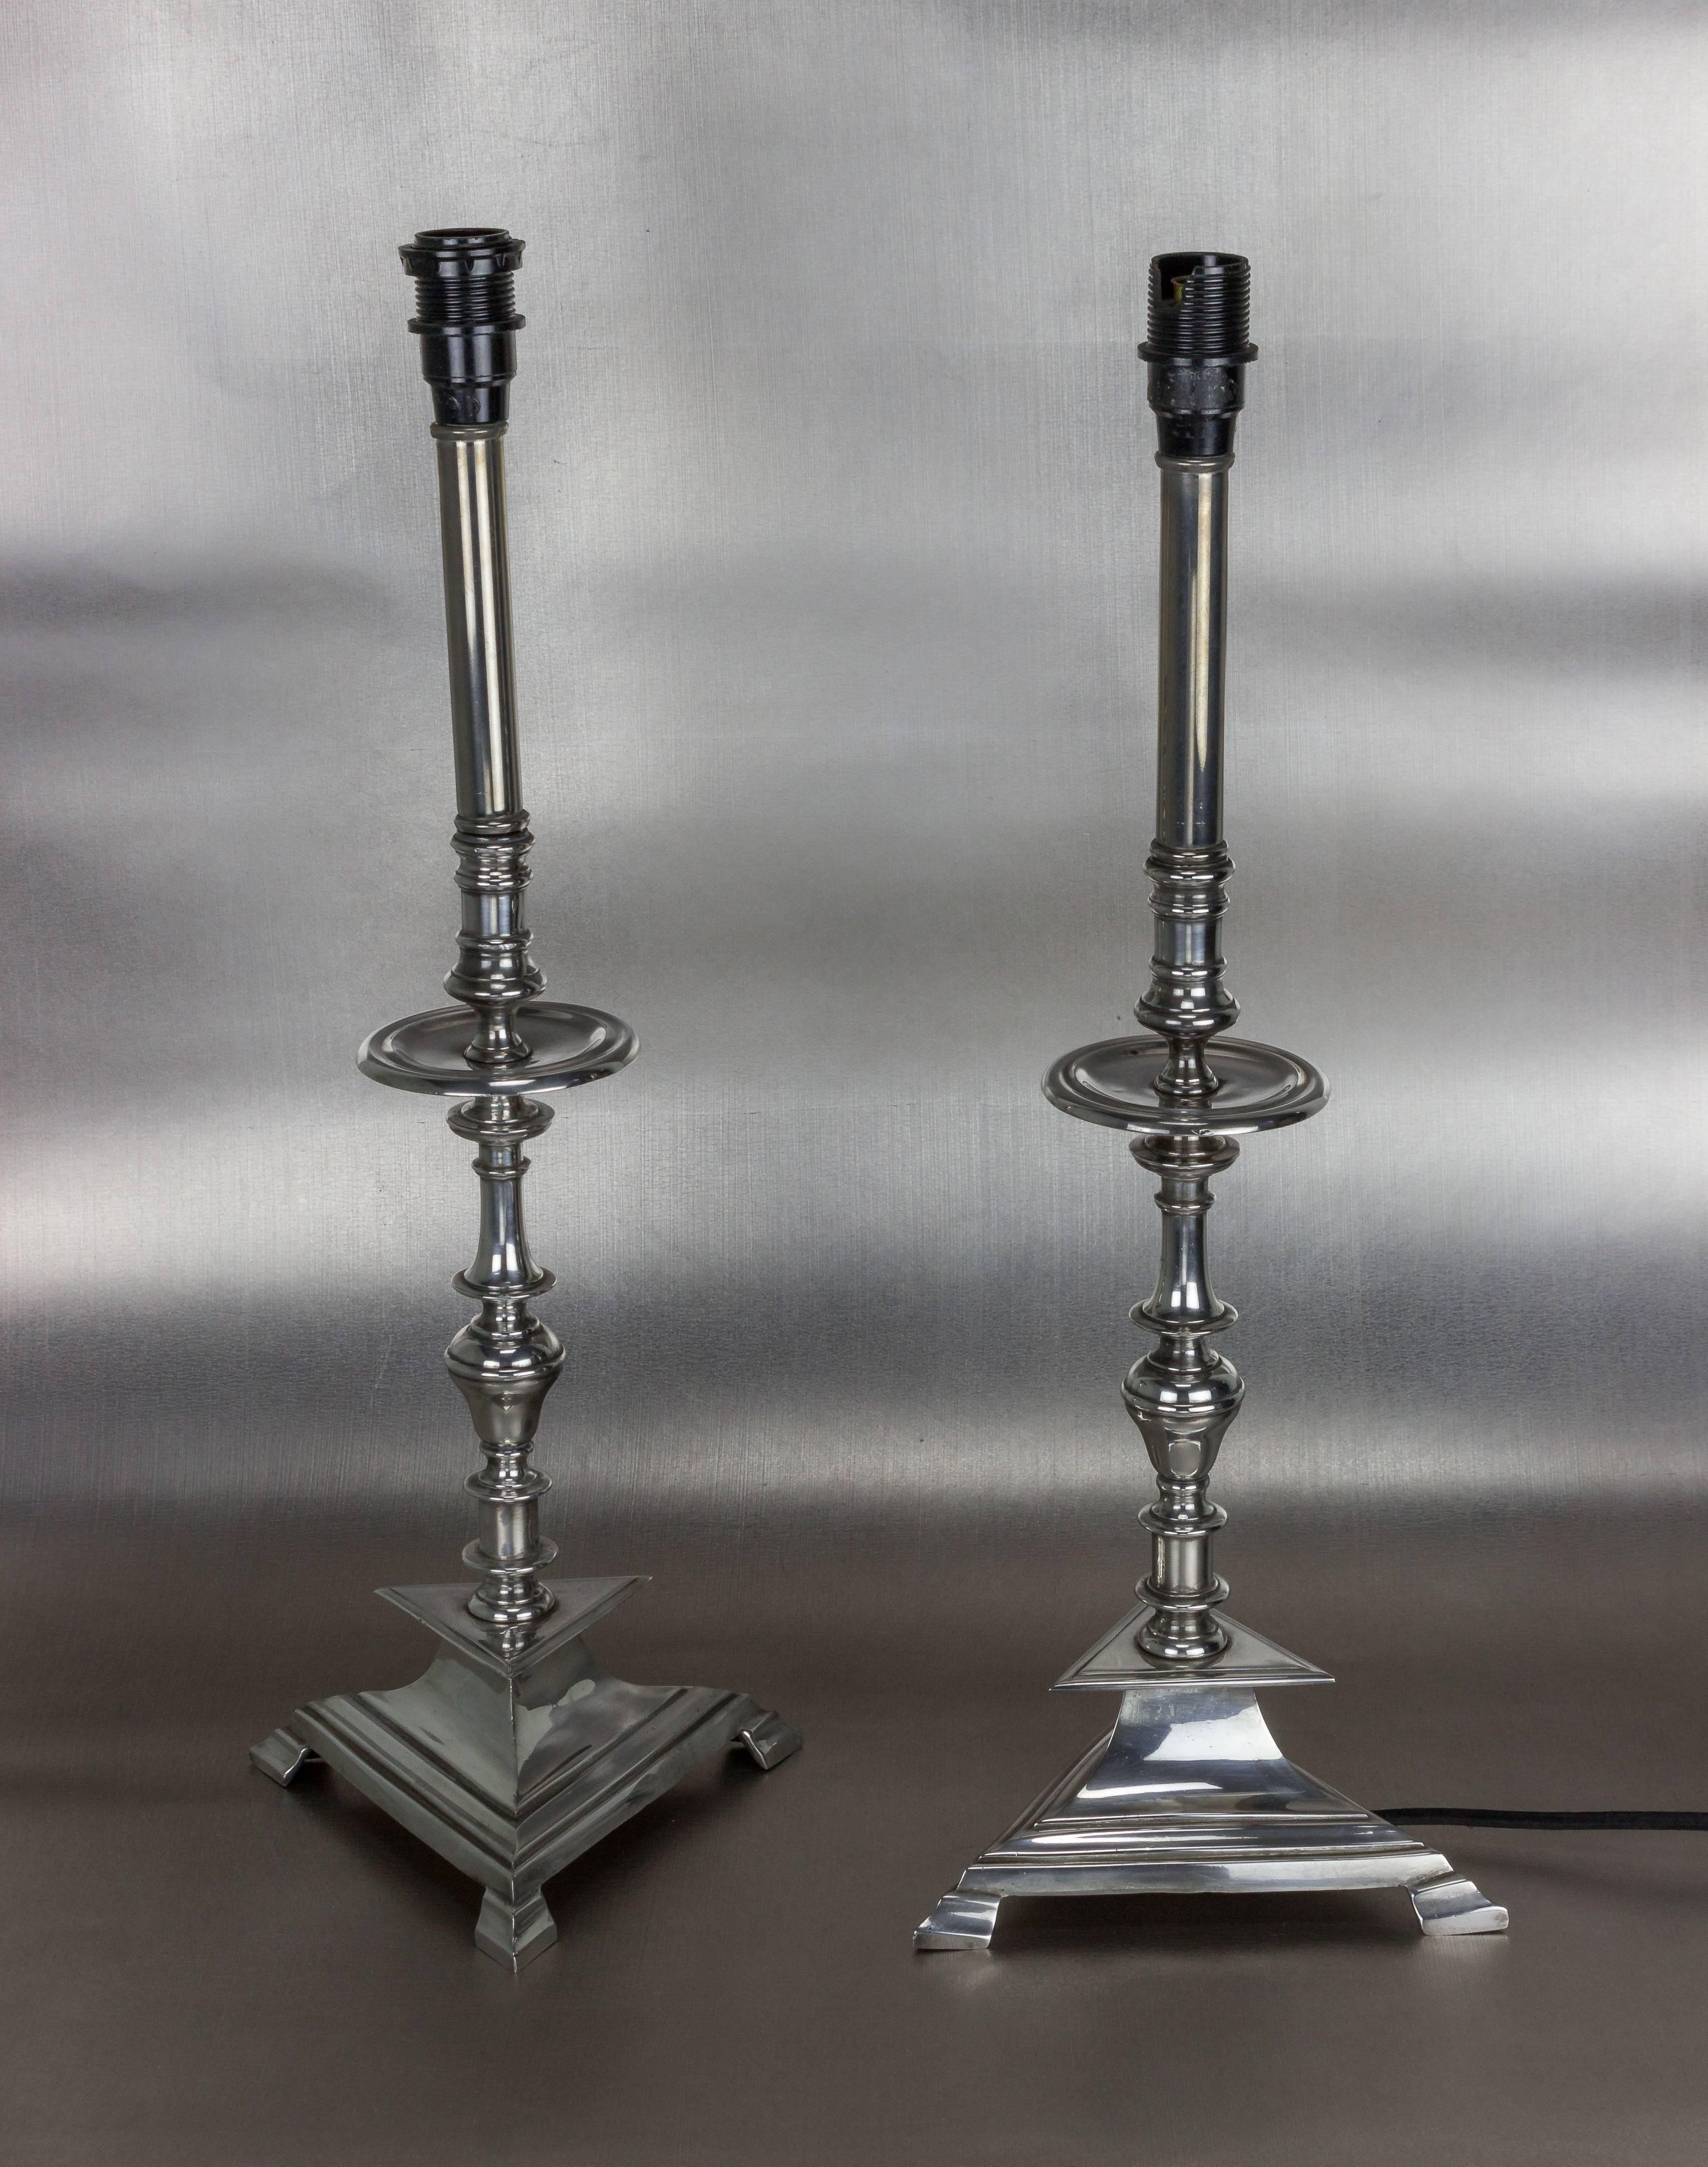 A stunning pair of restored nickel-plated French Art Deco table lamps. These Art Deco table lamps are a classic example of outstanding vintage lighting design. The footed triangular bases give the lamps a unique and angular look, while the nickel